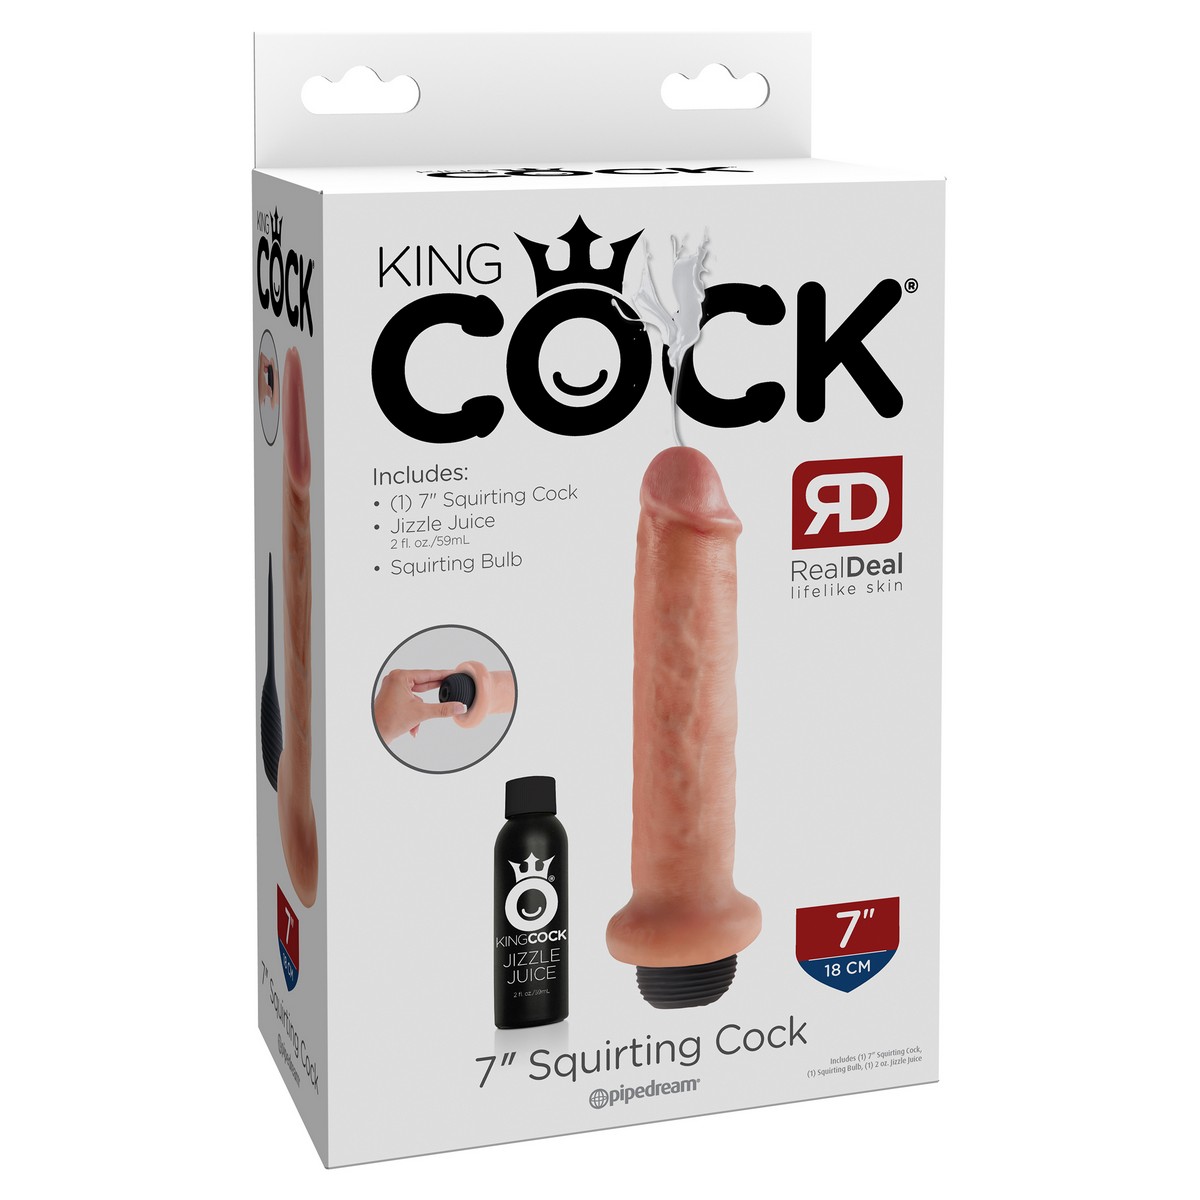    7 Squirting Cock